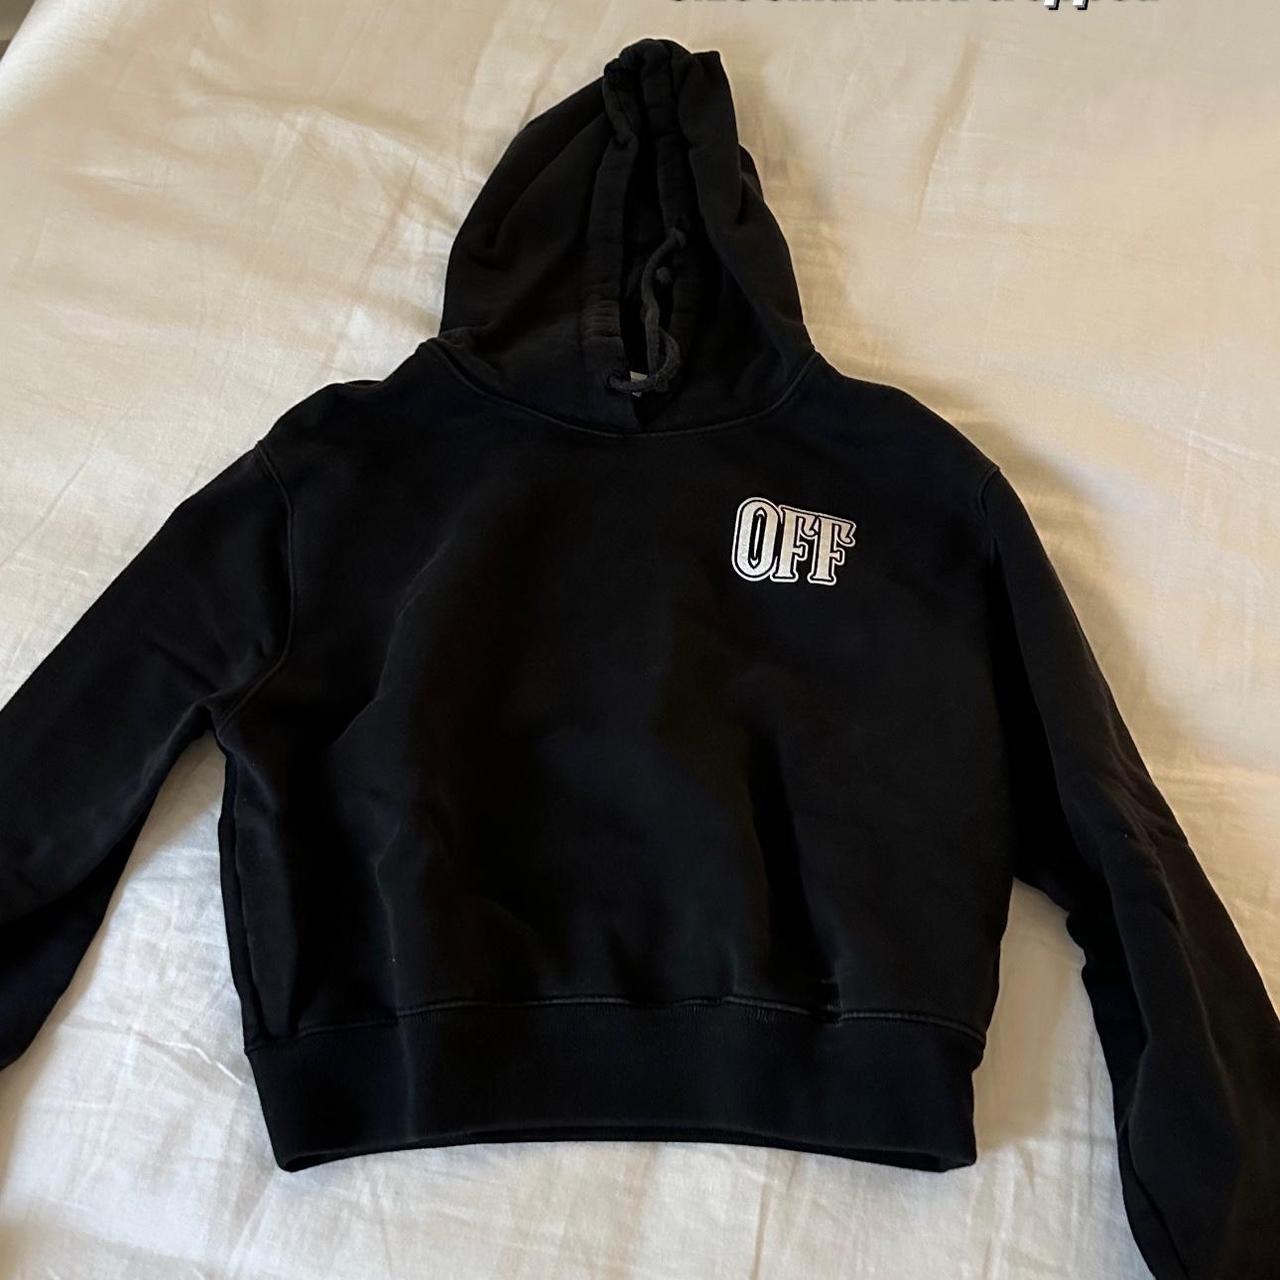 OFFWHITE women’s hoodie cropped size small - Depop